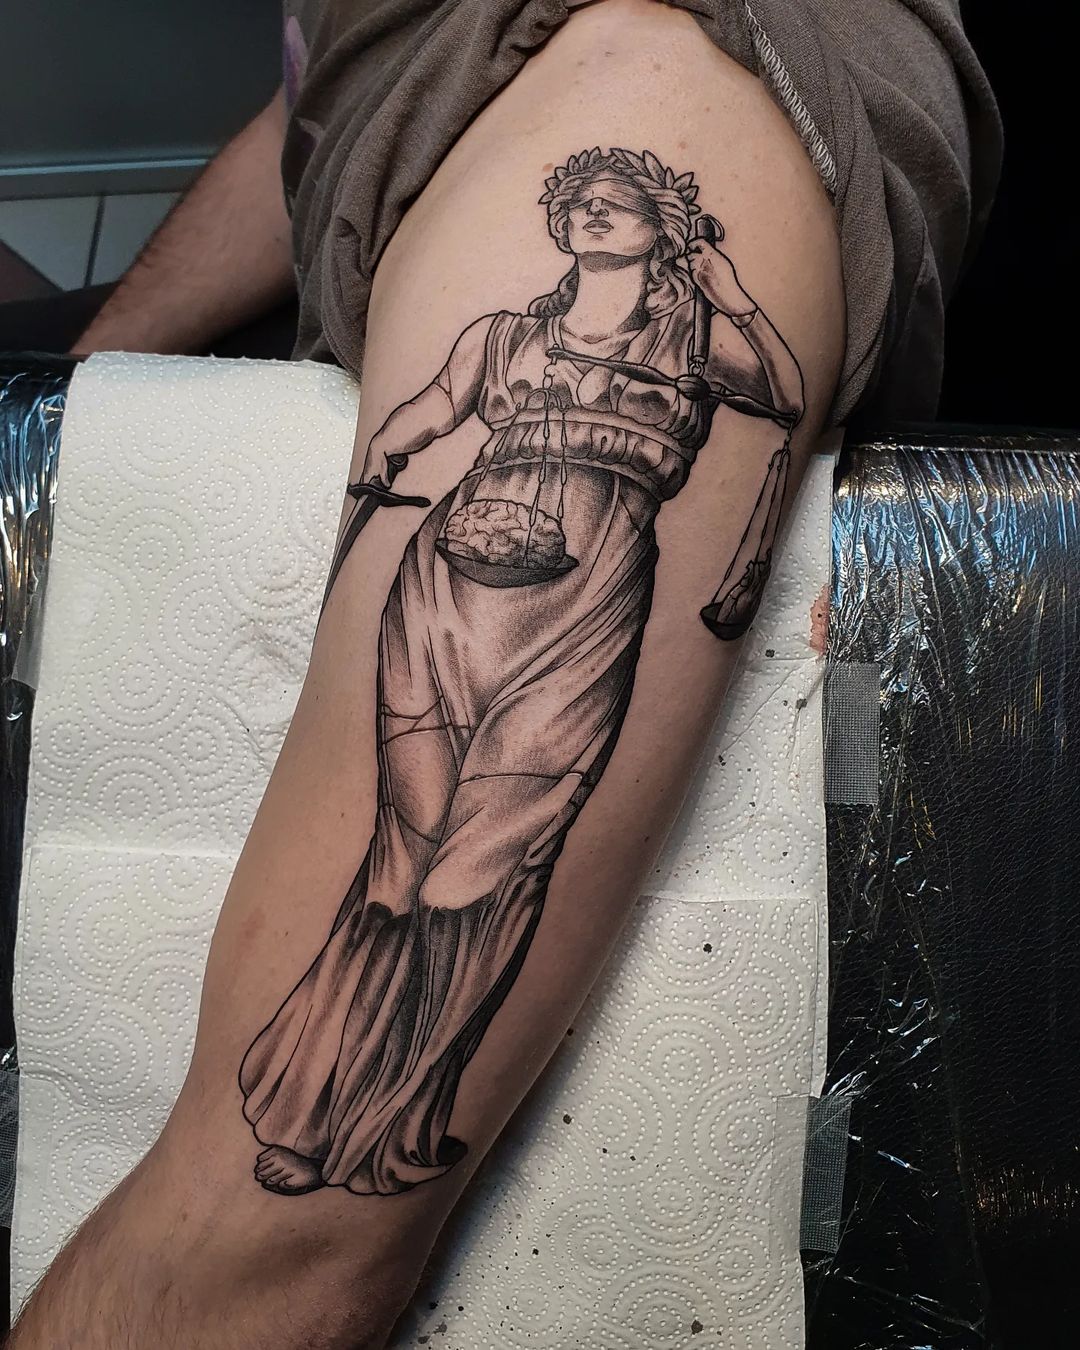 Lady Justice on my man Patrick. Fun session with time flying 
.
#ladyjustice #an